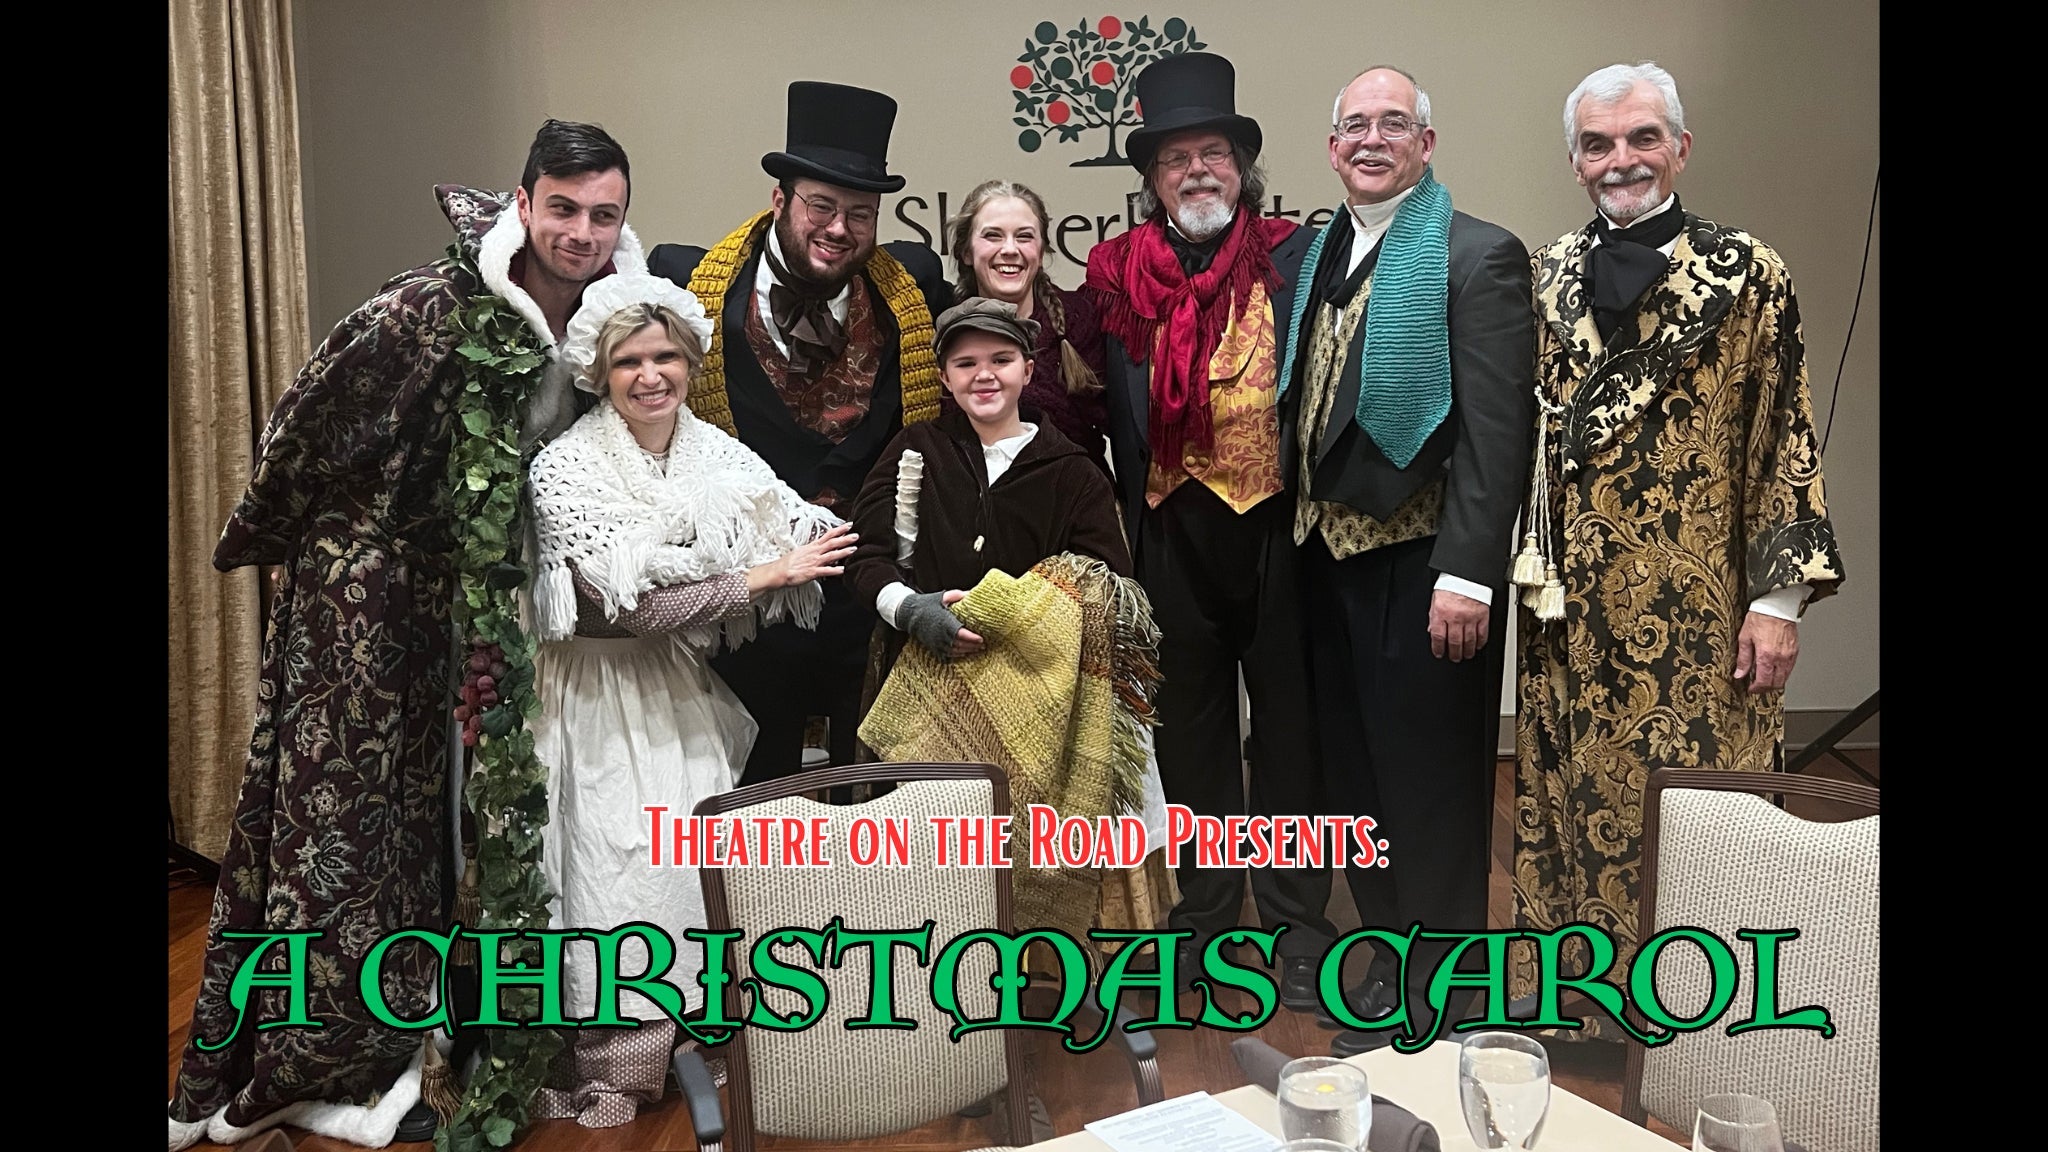 A Christmas Carol: A Live Interactive Family Experience in Milford promo photo for Black Friday 20% Off Sale presale offer code